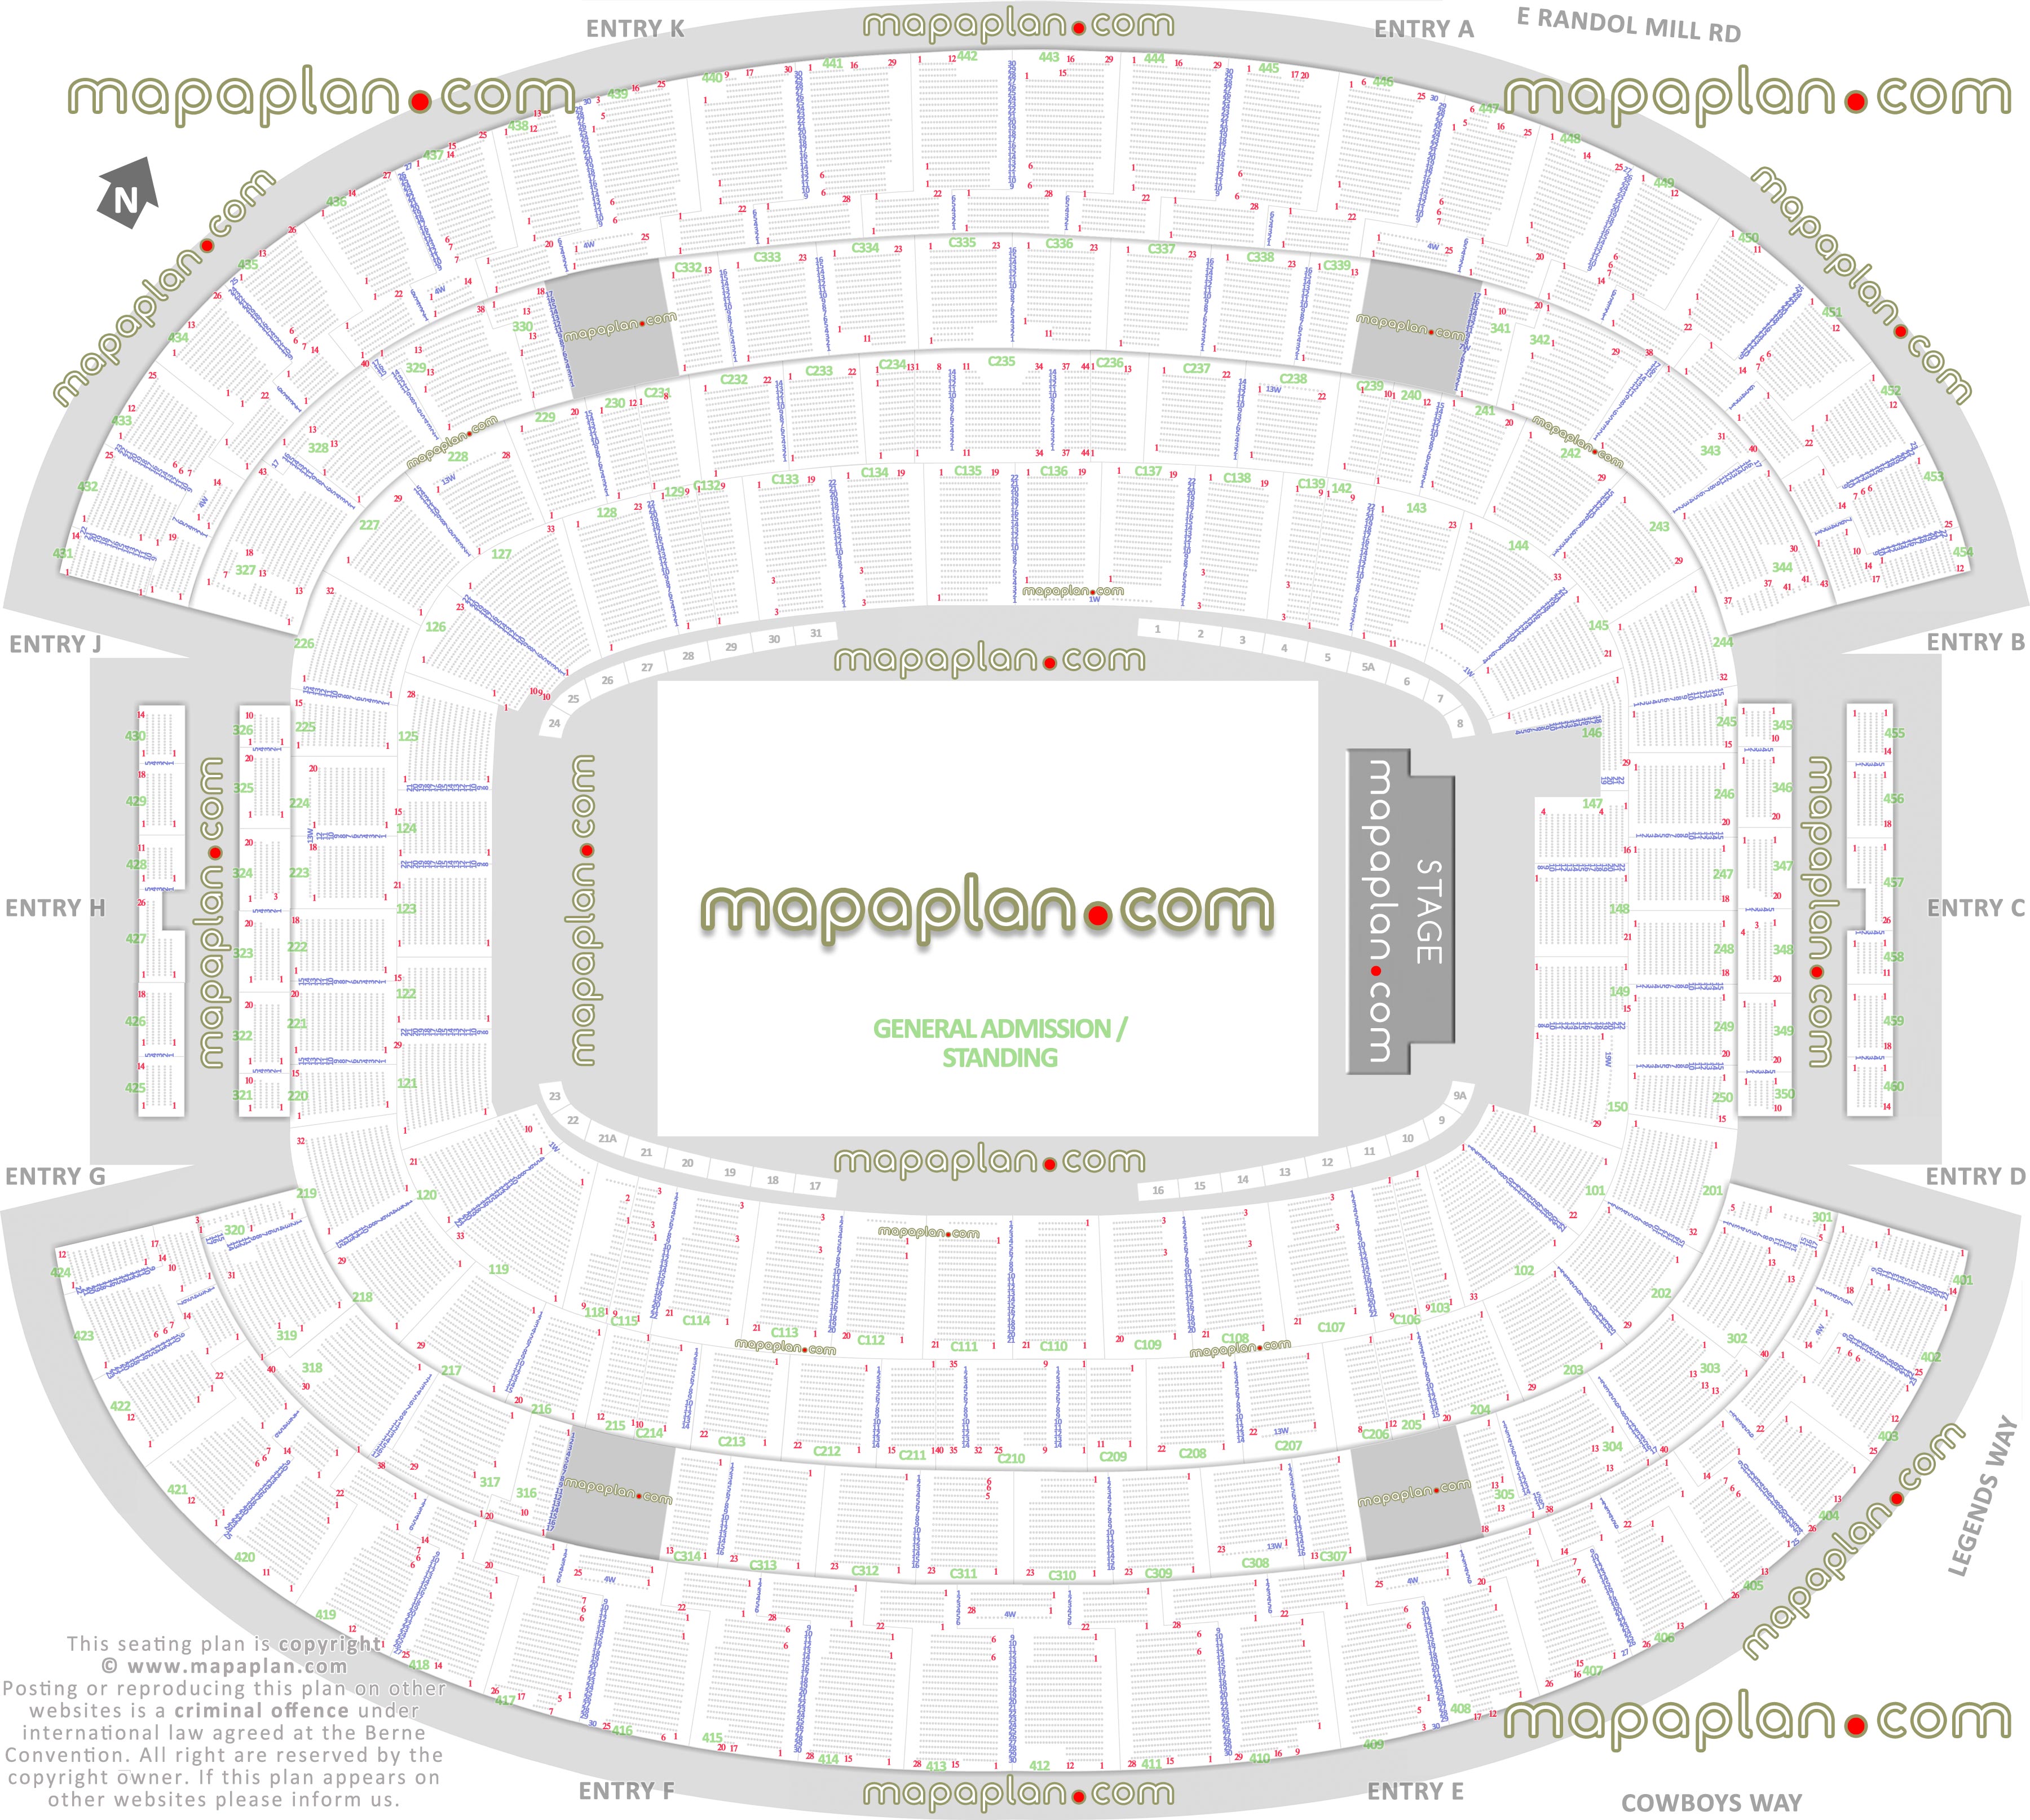 general admission ga floor standing concert capacity 3d plan att center stadium arlington tx concert stage detailed floor pit plan sections best seat numbers selection information guide virtual interactive image map rows 1 2 3 4 5 6 7 8 9 10 11 12 13 14 15 16 17 18 19 20 21 22 23 24 25 26 27 28 29 30 Dallas Cowboys ATT Stadium seating chart